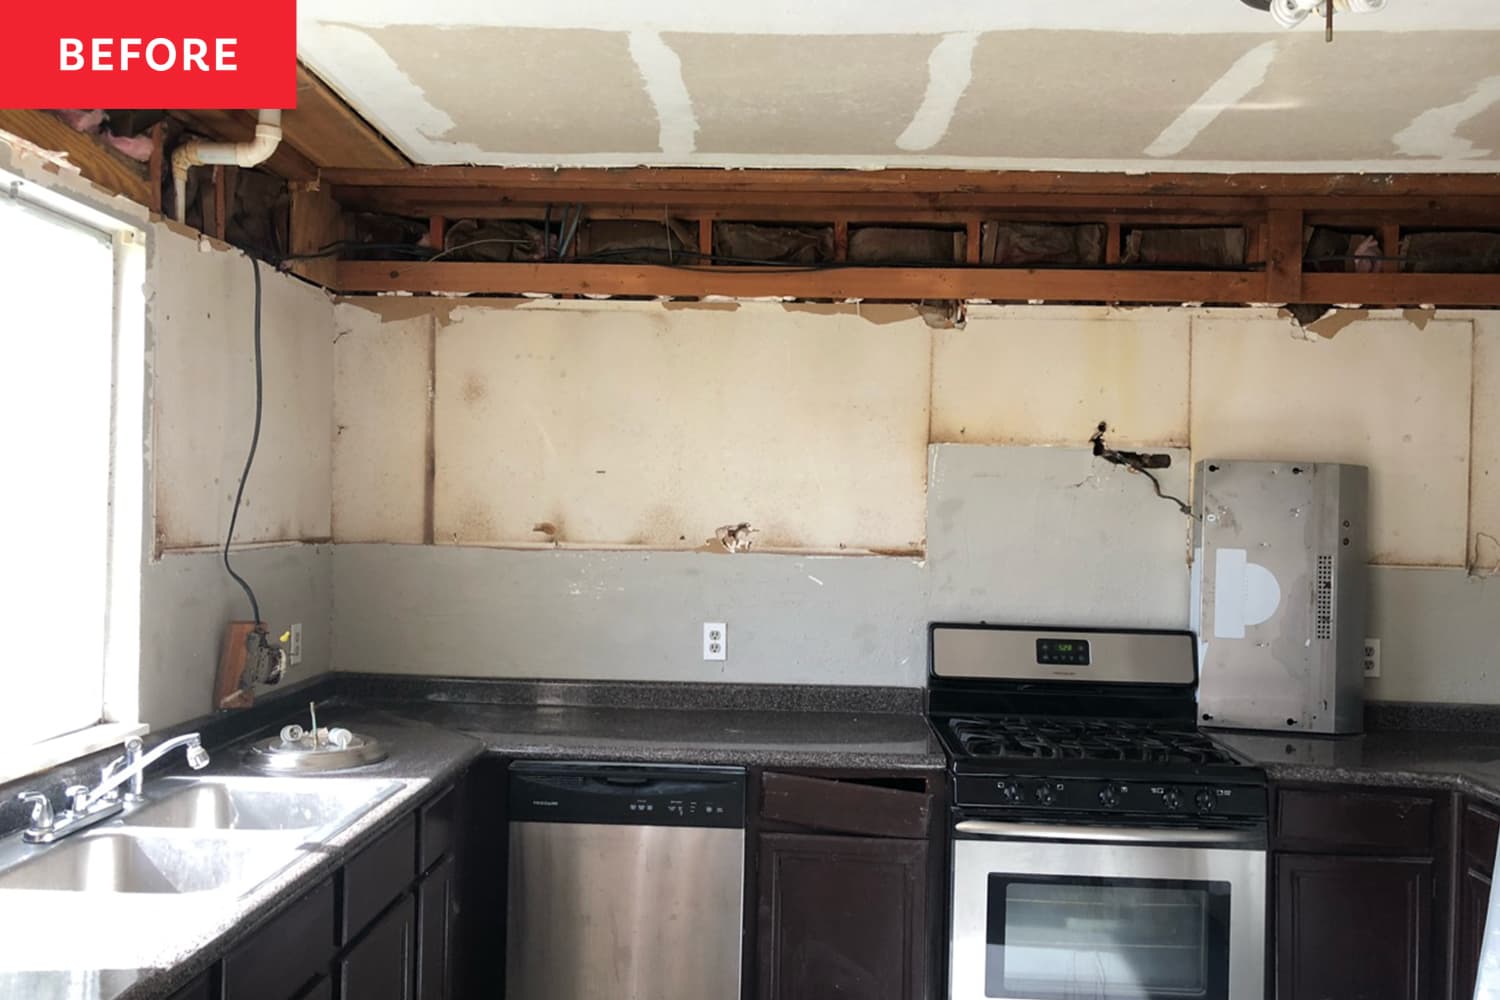 Before & After: Removing the Cabinets Brightened This Kitchen Up *While* Increasing Storage Space